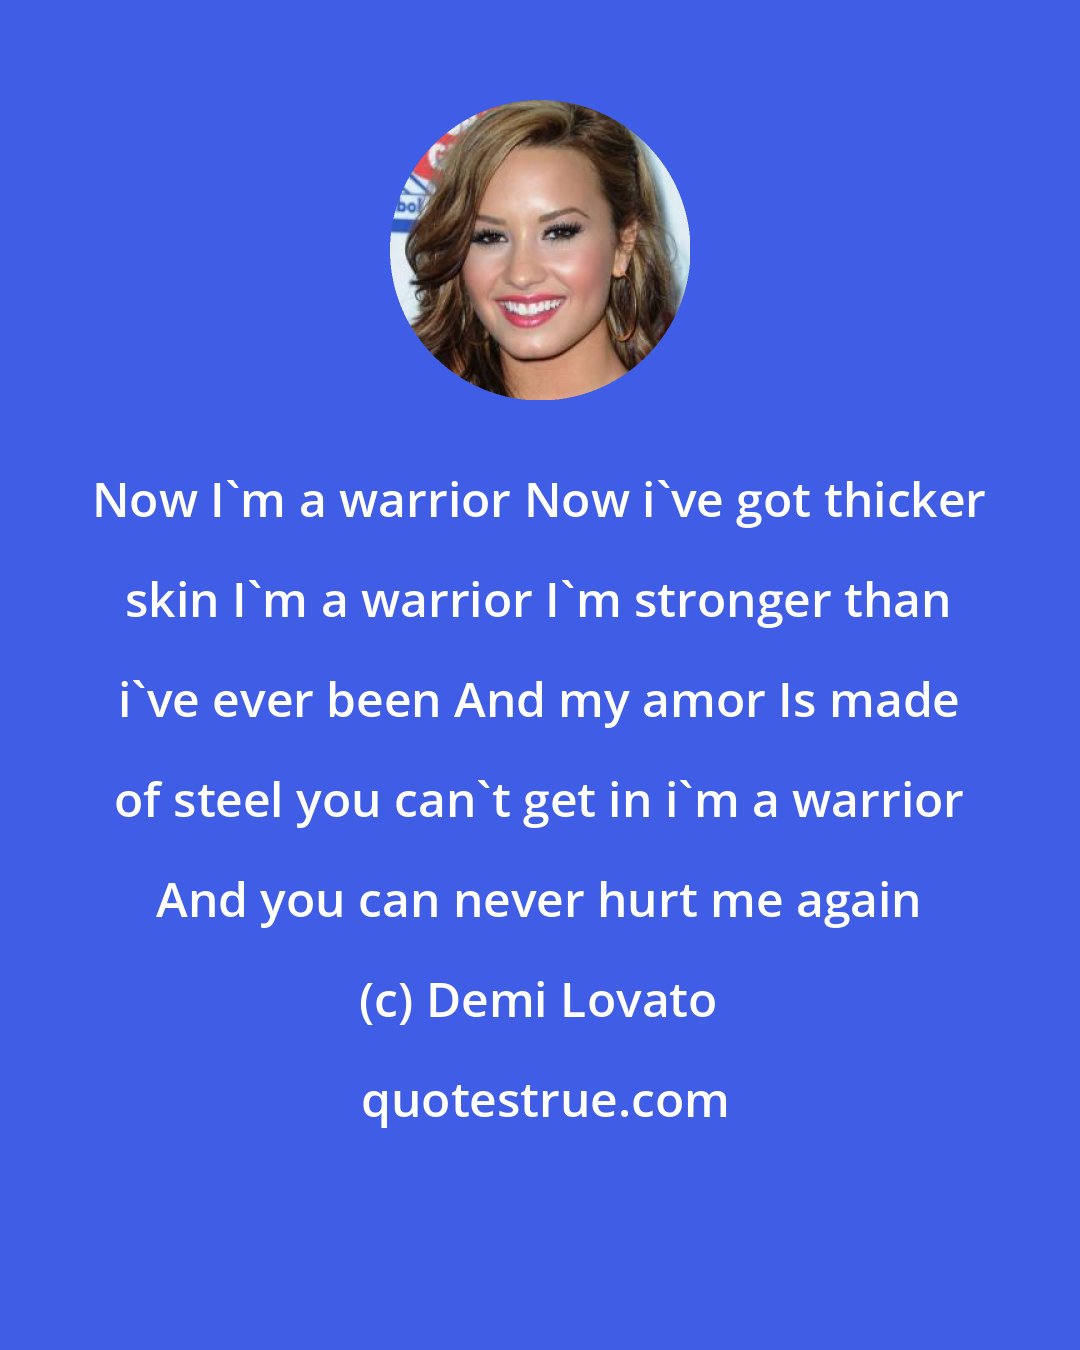 Demi Lovato: Now I'm a warrior Now i've got thicker skin I'm a warrior I'm stronger than i've ever been And my amor Is made of steel you can't get in i'm a warrior And you can never hurt me again